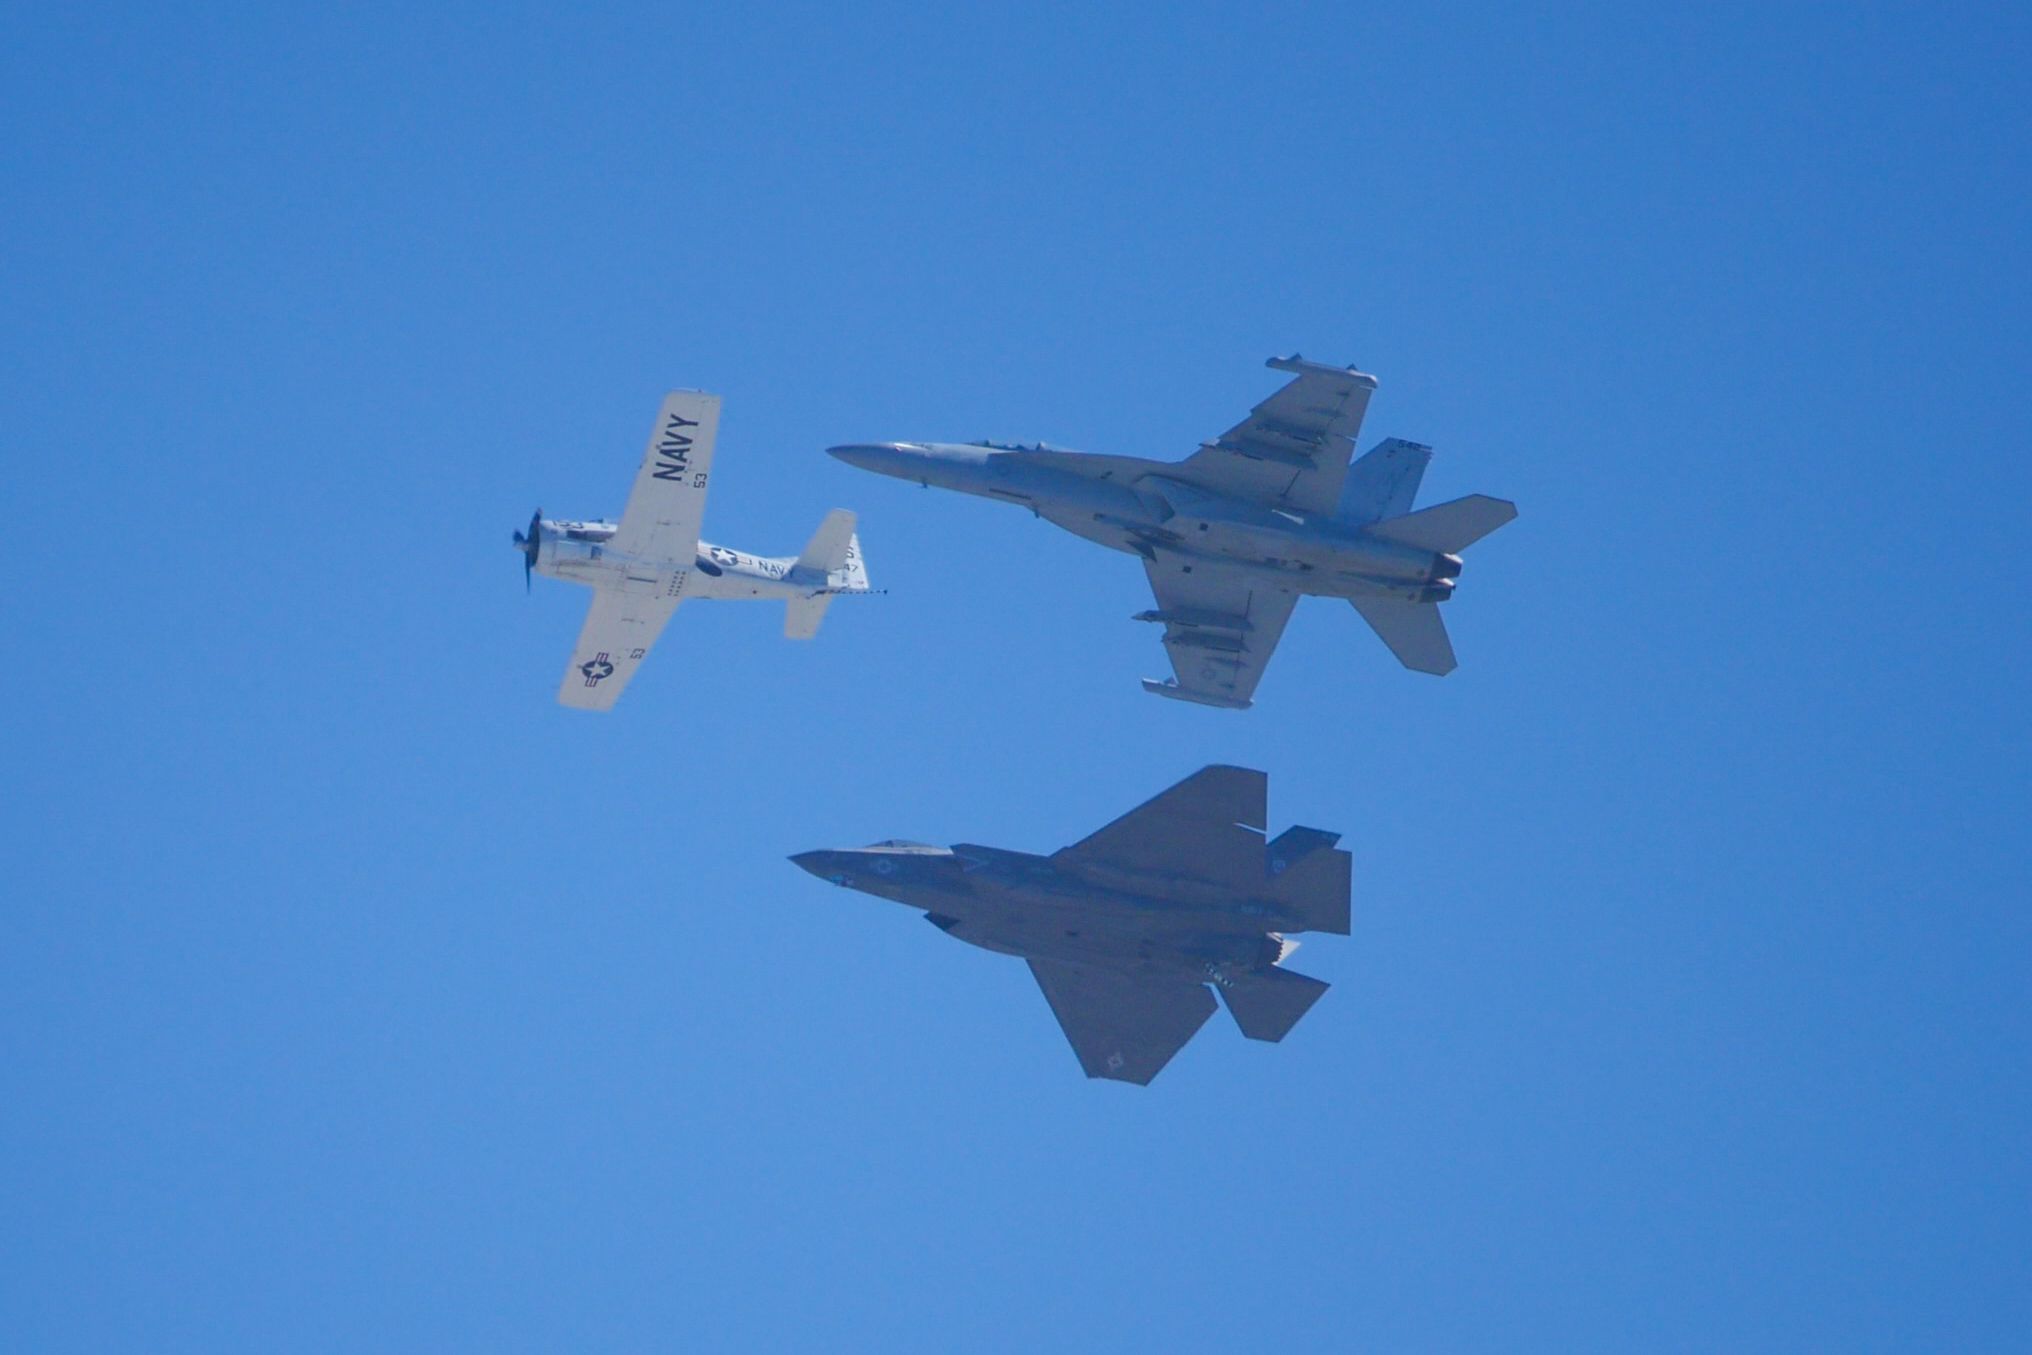 Three planes fly together in formation. An old white prop plane leads as two modern military jets follow.